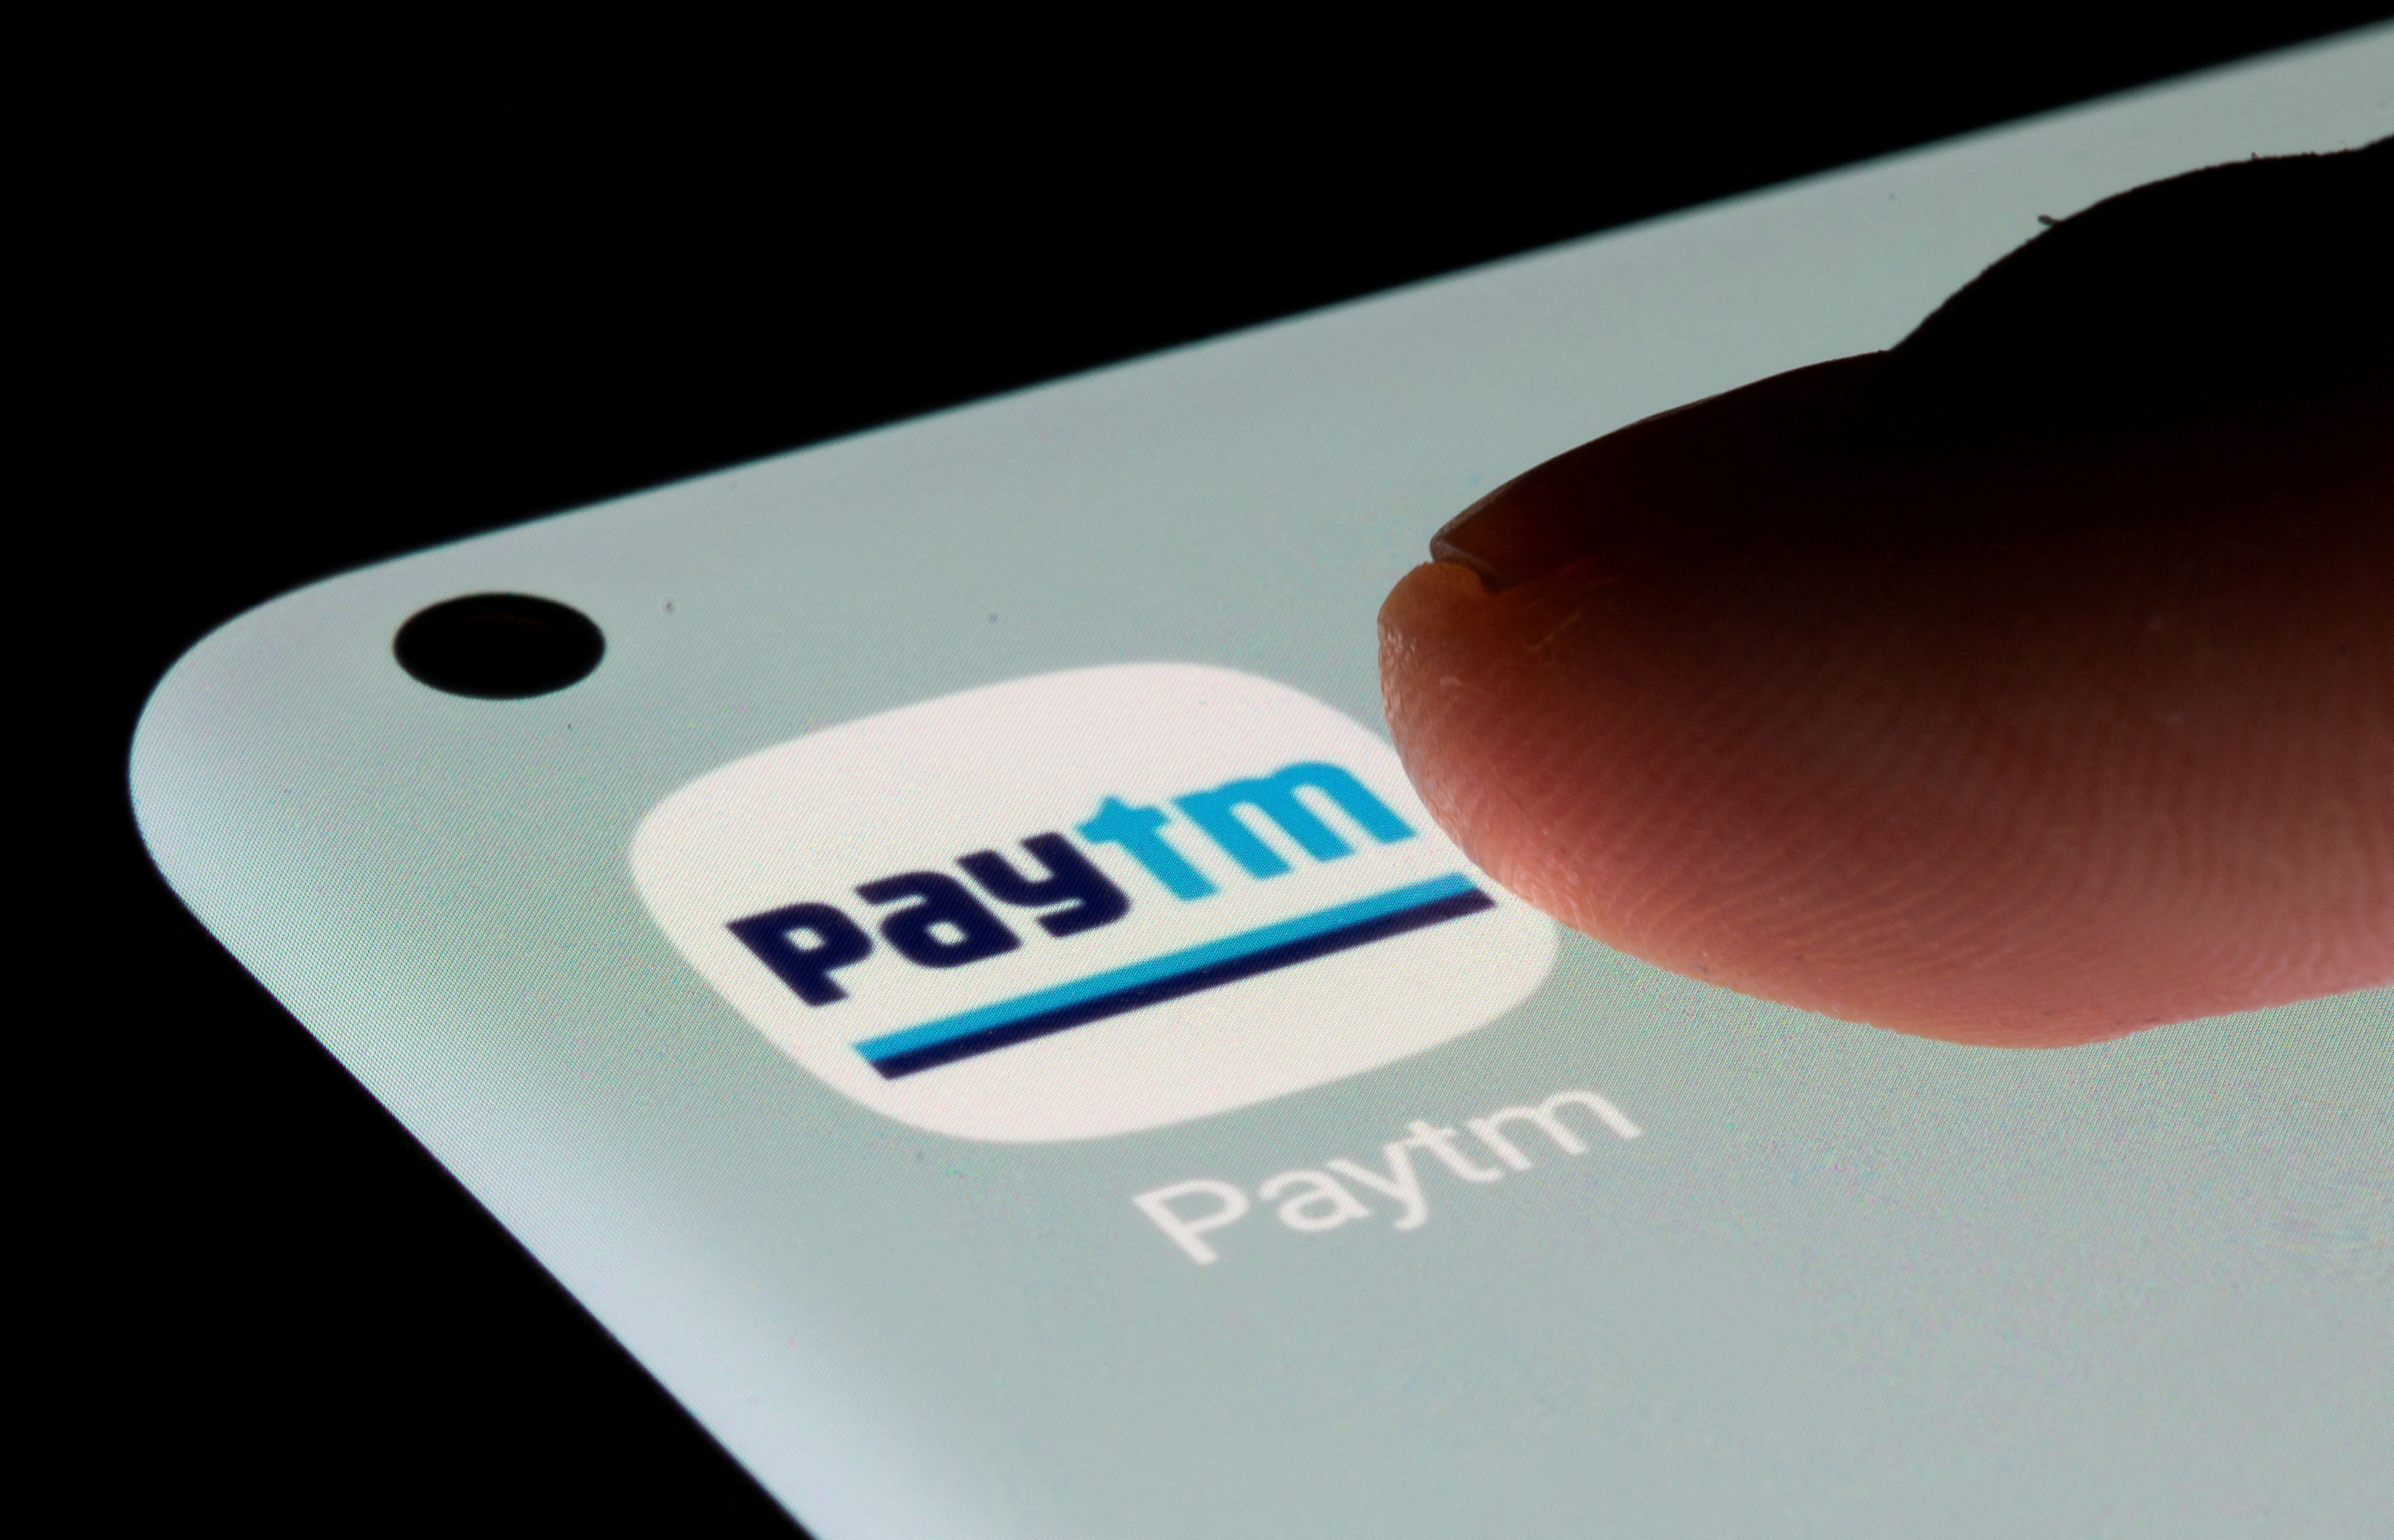 Could this knowledge be behind the bounce back of Paytm shares?